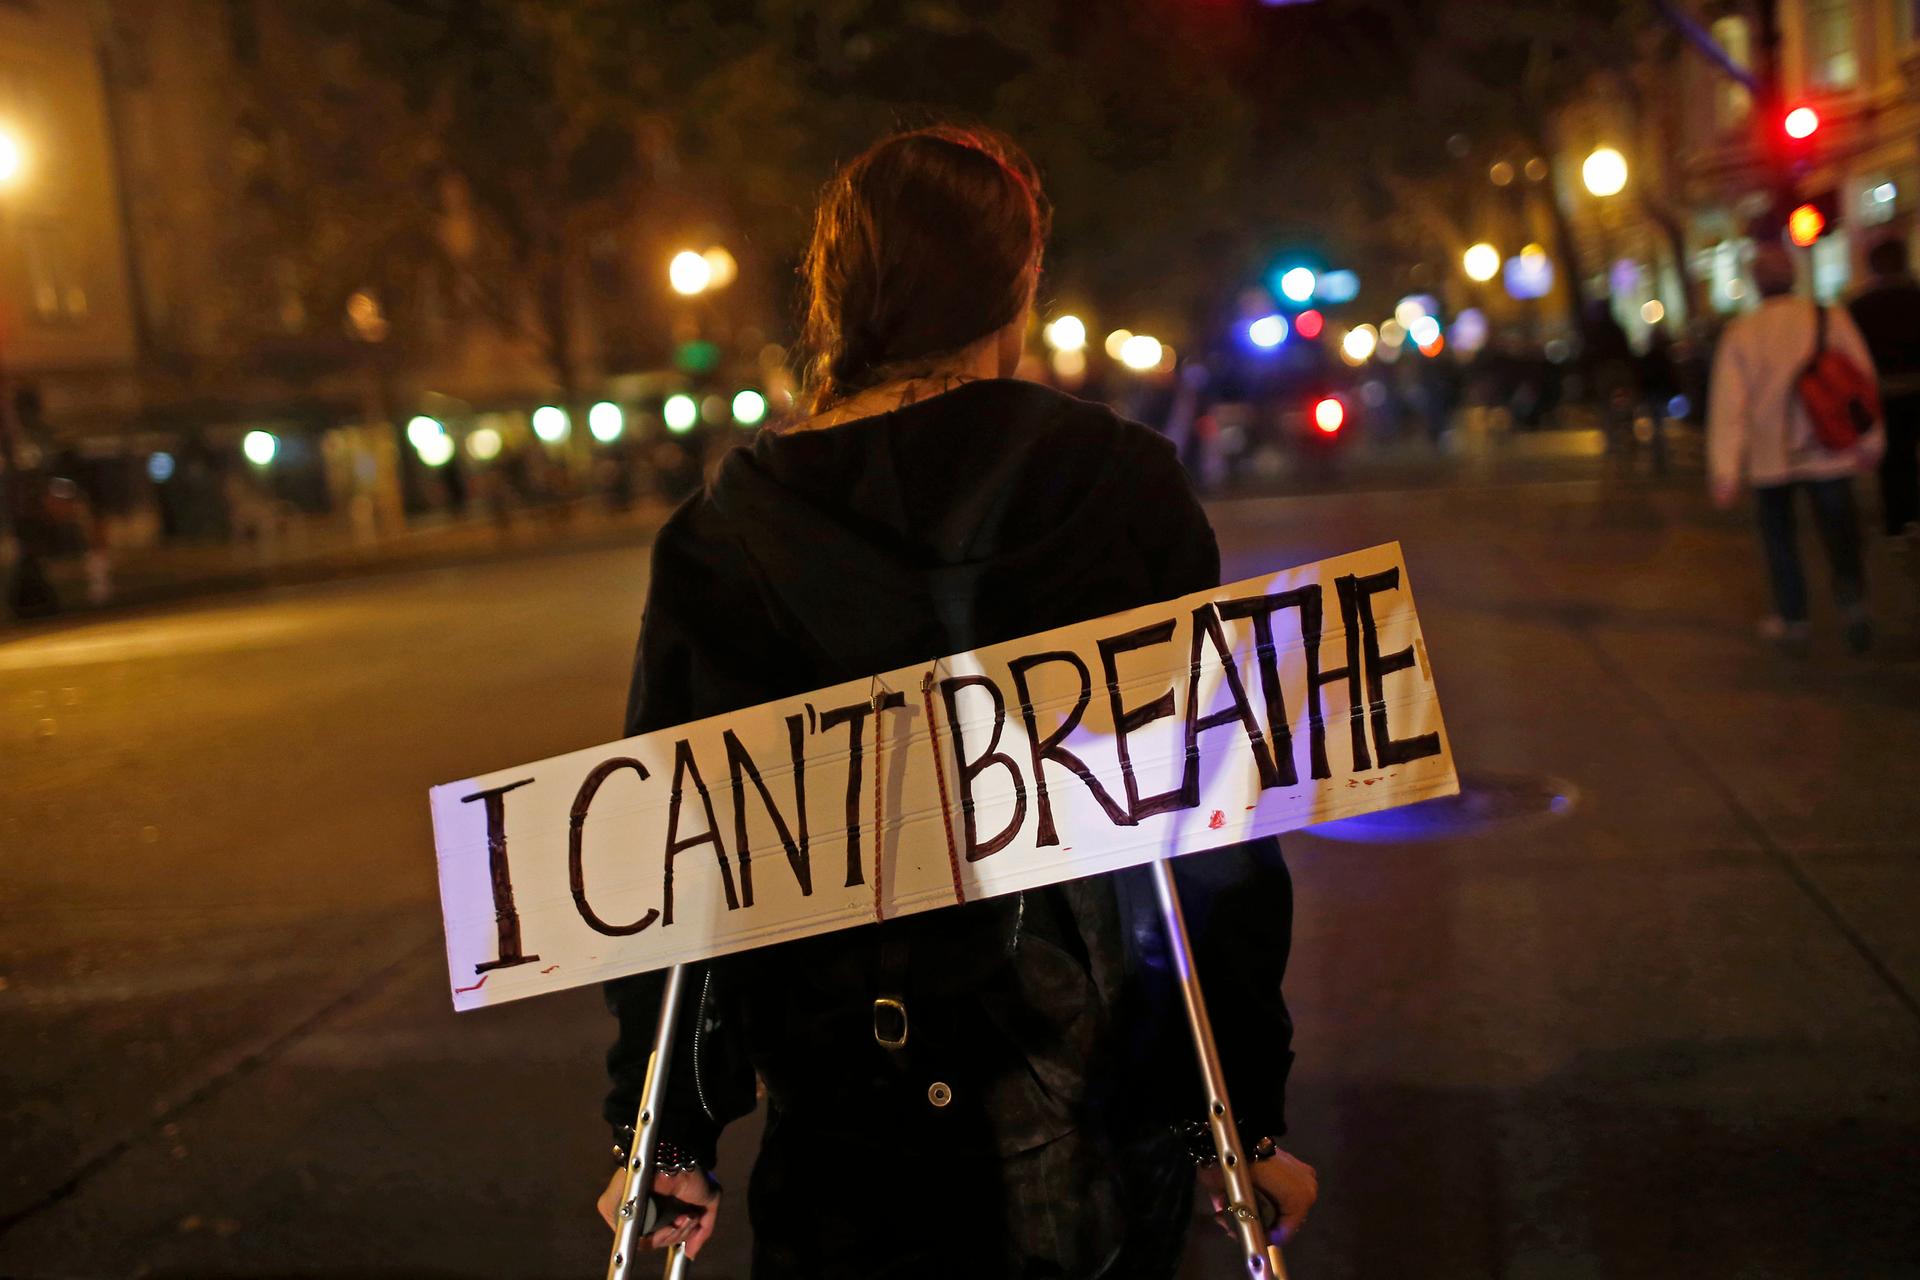 A protester in Oakland, California, on  December 3, 2014, wears a sign during a demonstration against the decision by a New York City grand jury not to indict a police officer in the death of Eric Garner.